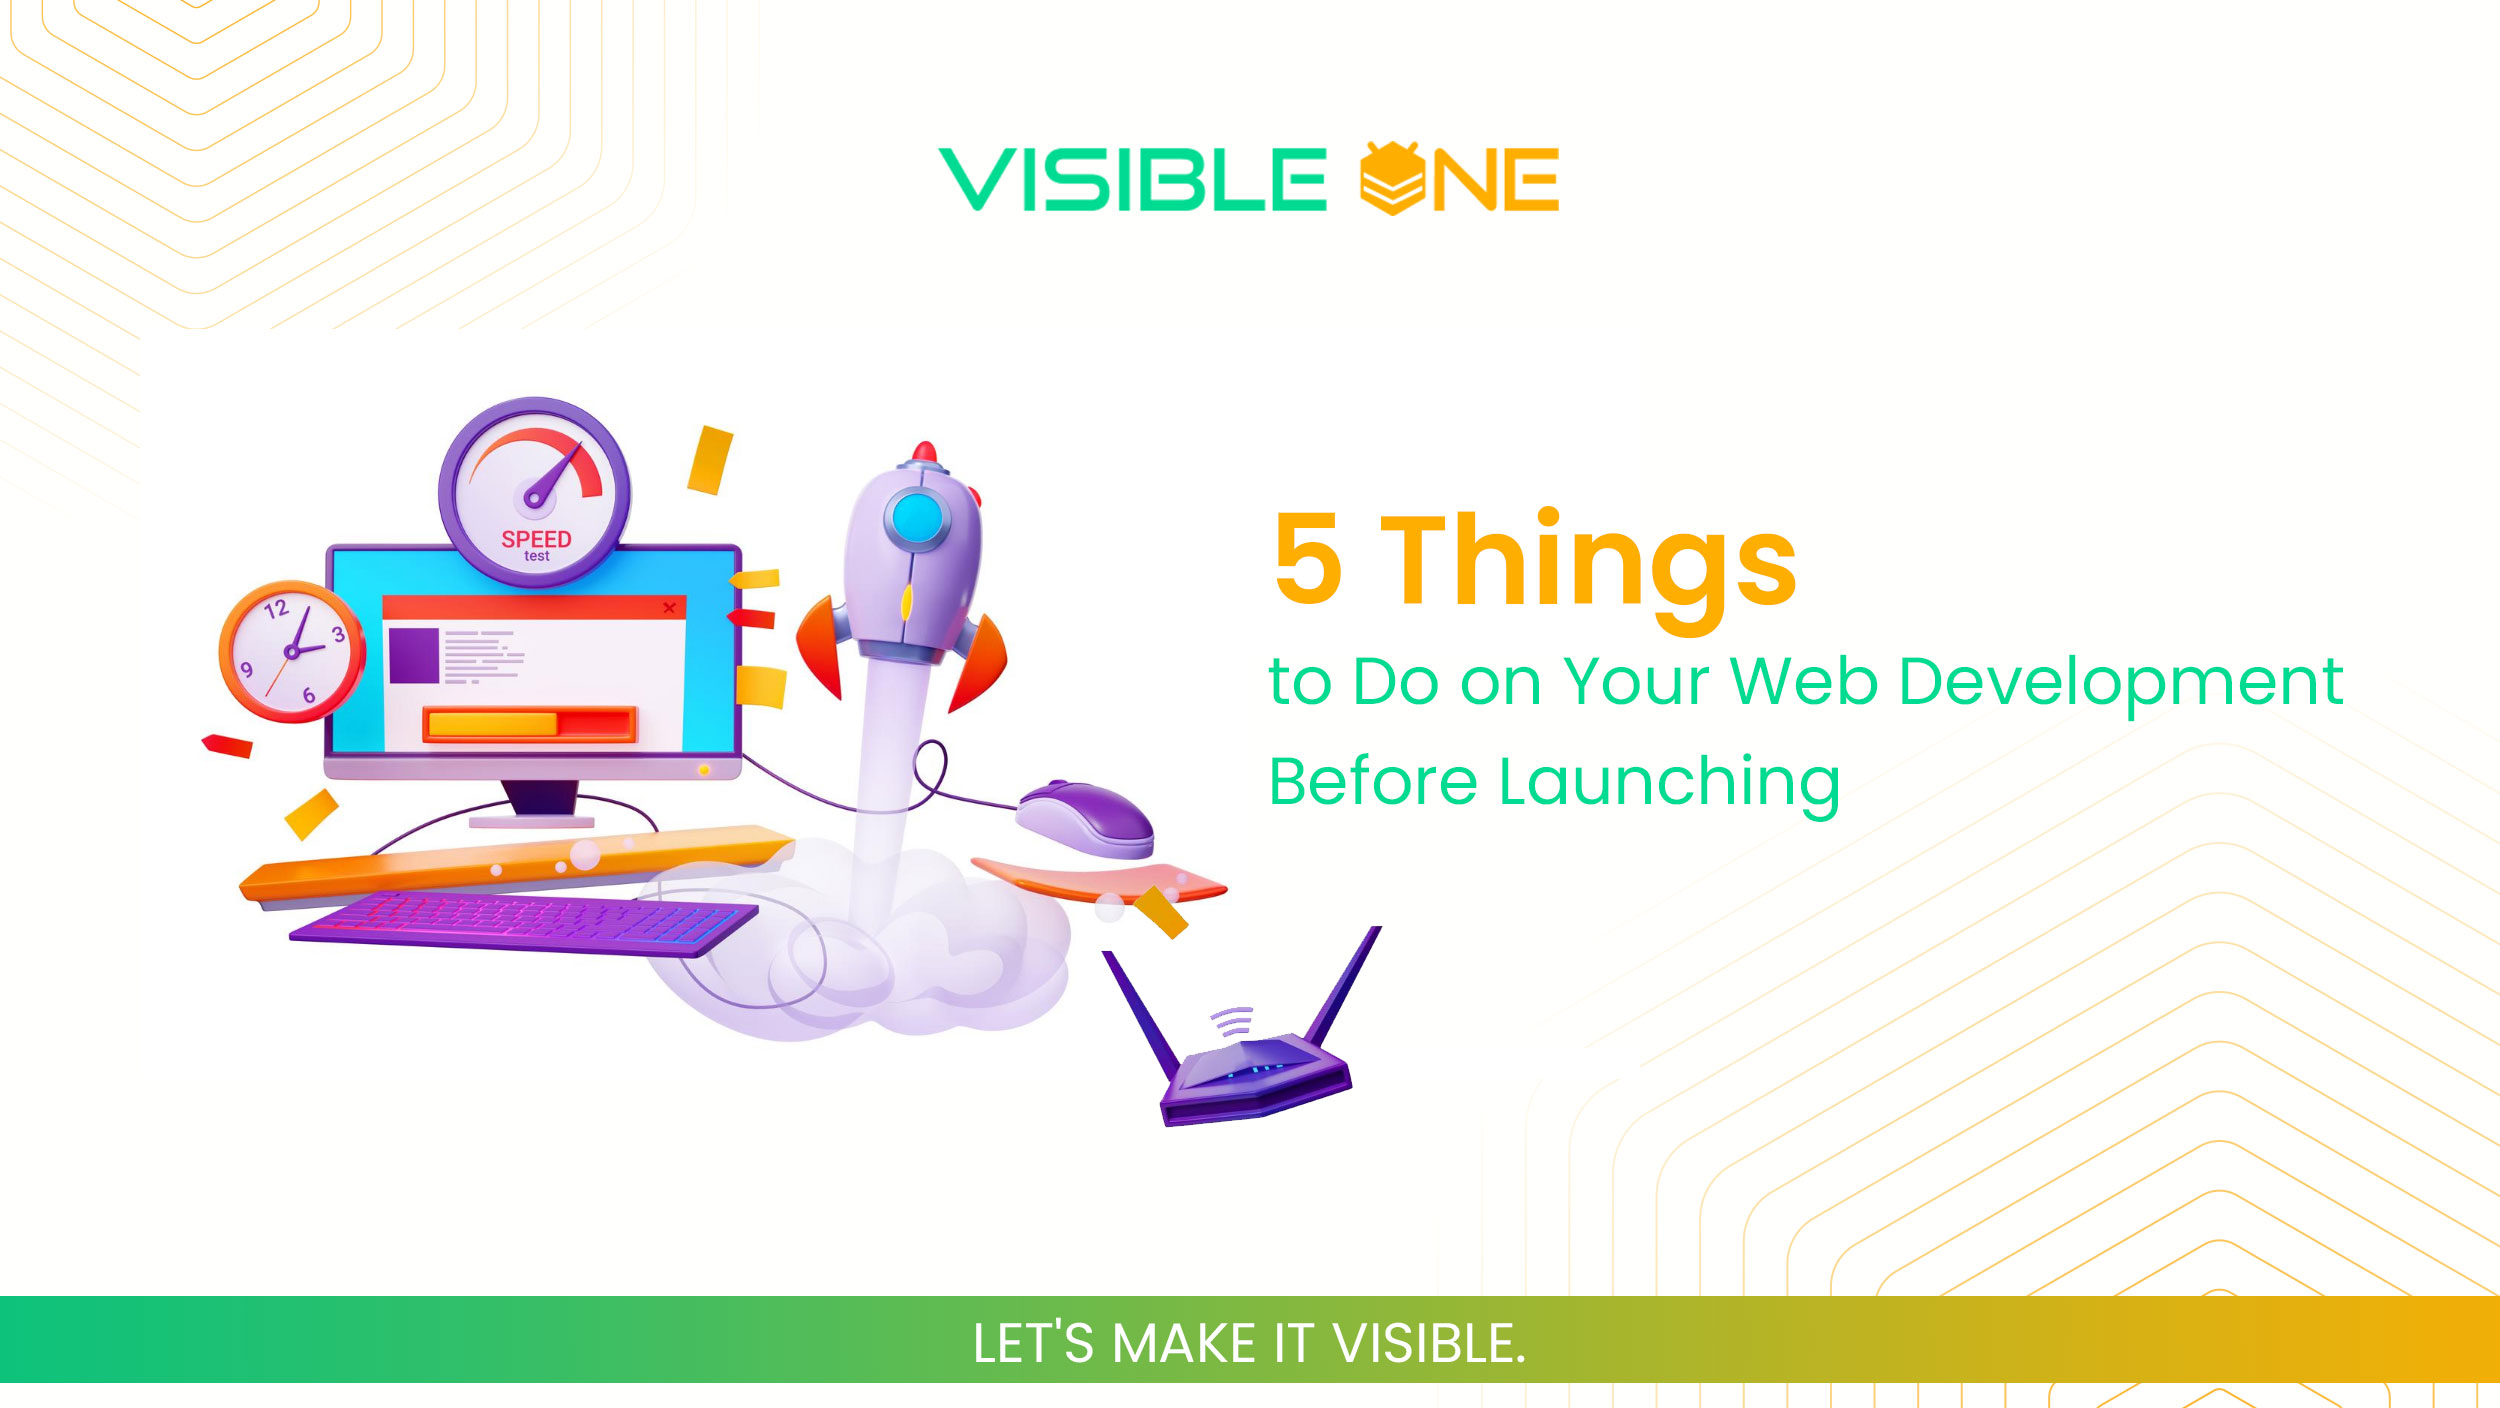 5 Things to Do on Your Web Development Before Launching